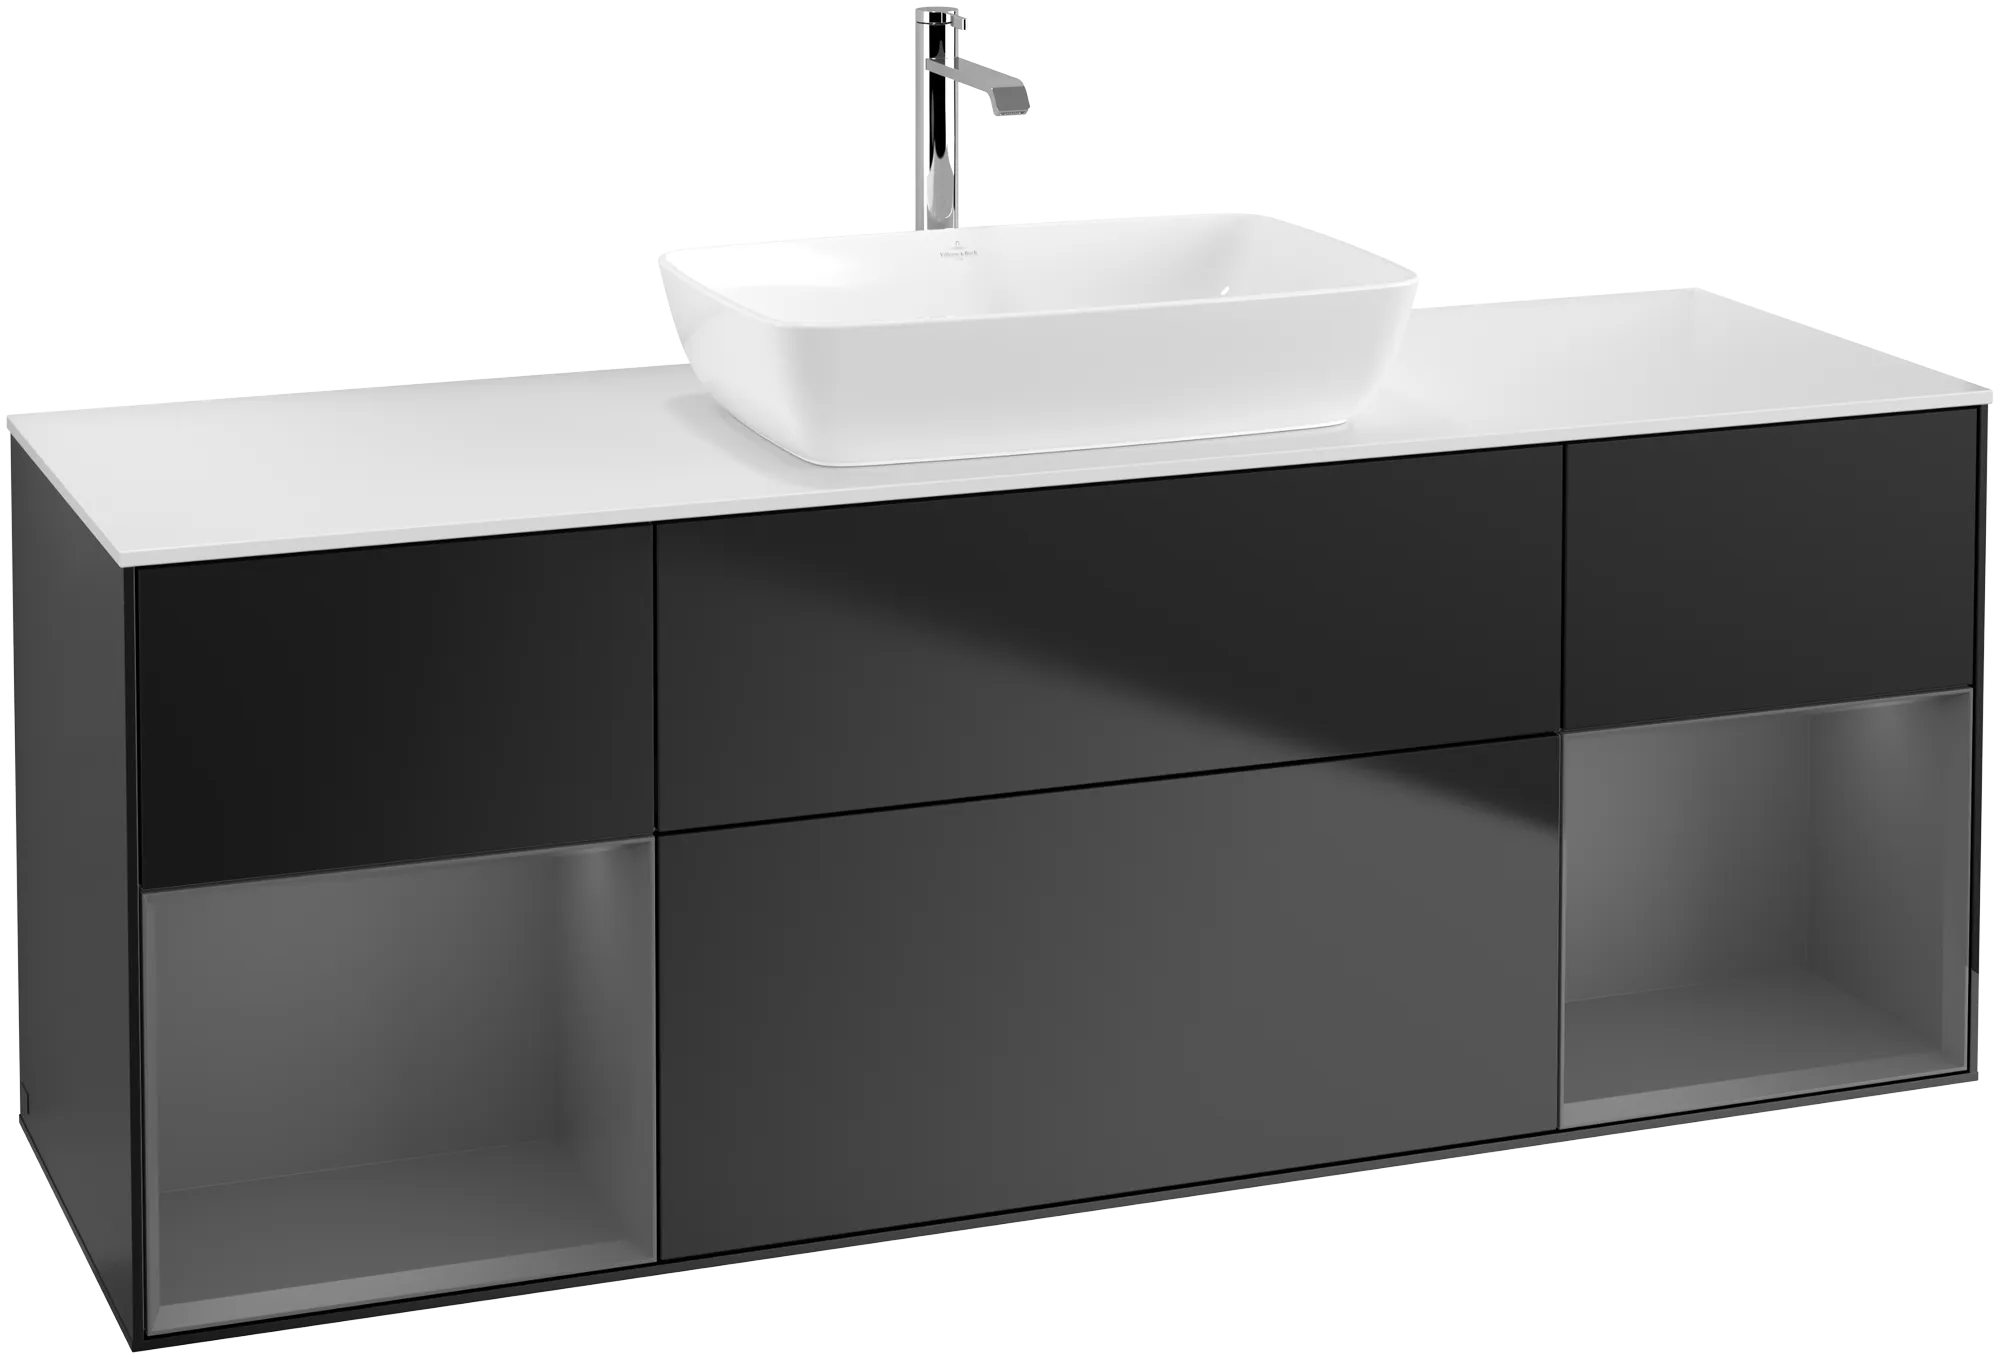 VILLEROY BOCH Finion Vanity unit, with lighting, 4 pull-out compartments, 1600 x 603 x 501 mm, Black Matt Lacquer / Anthracite Matt Lacquer / Glass White Matt #G861GKPD resmi